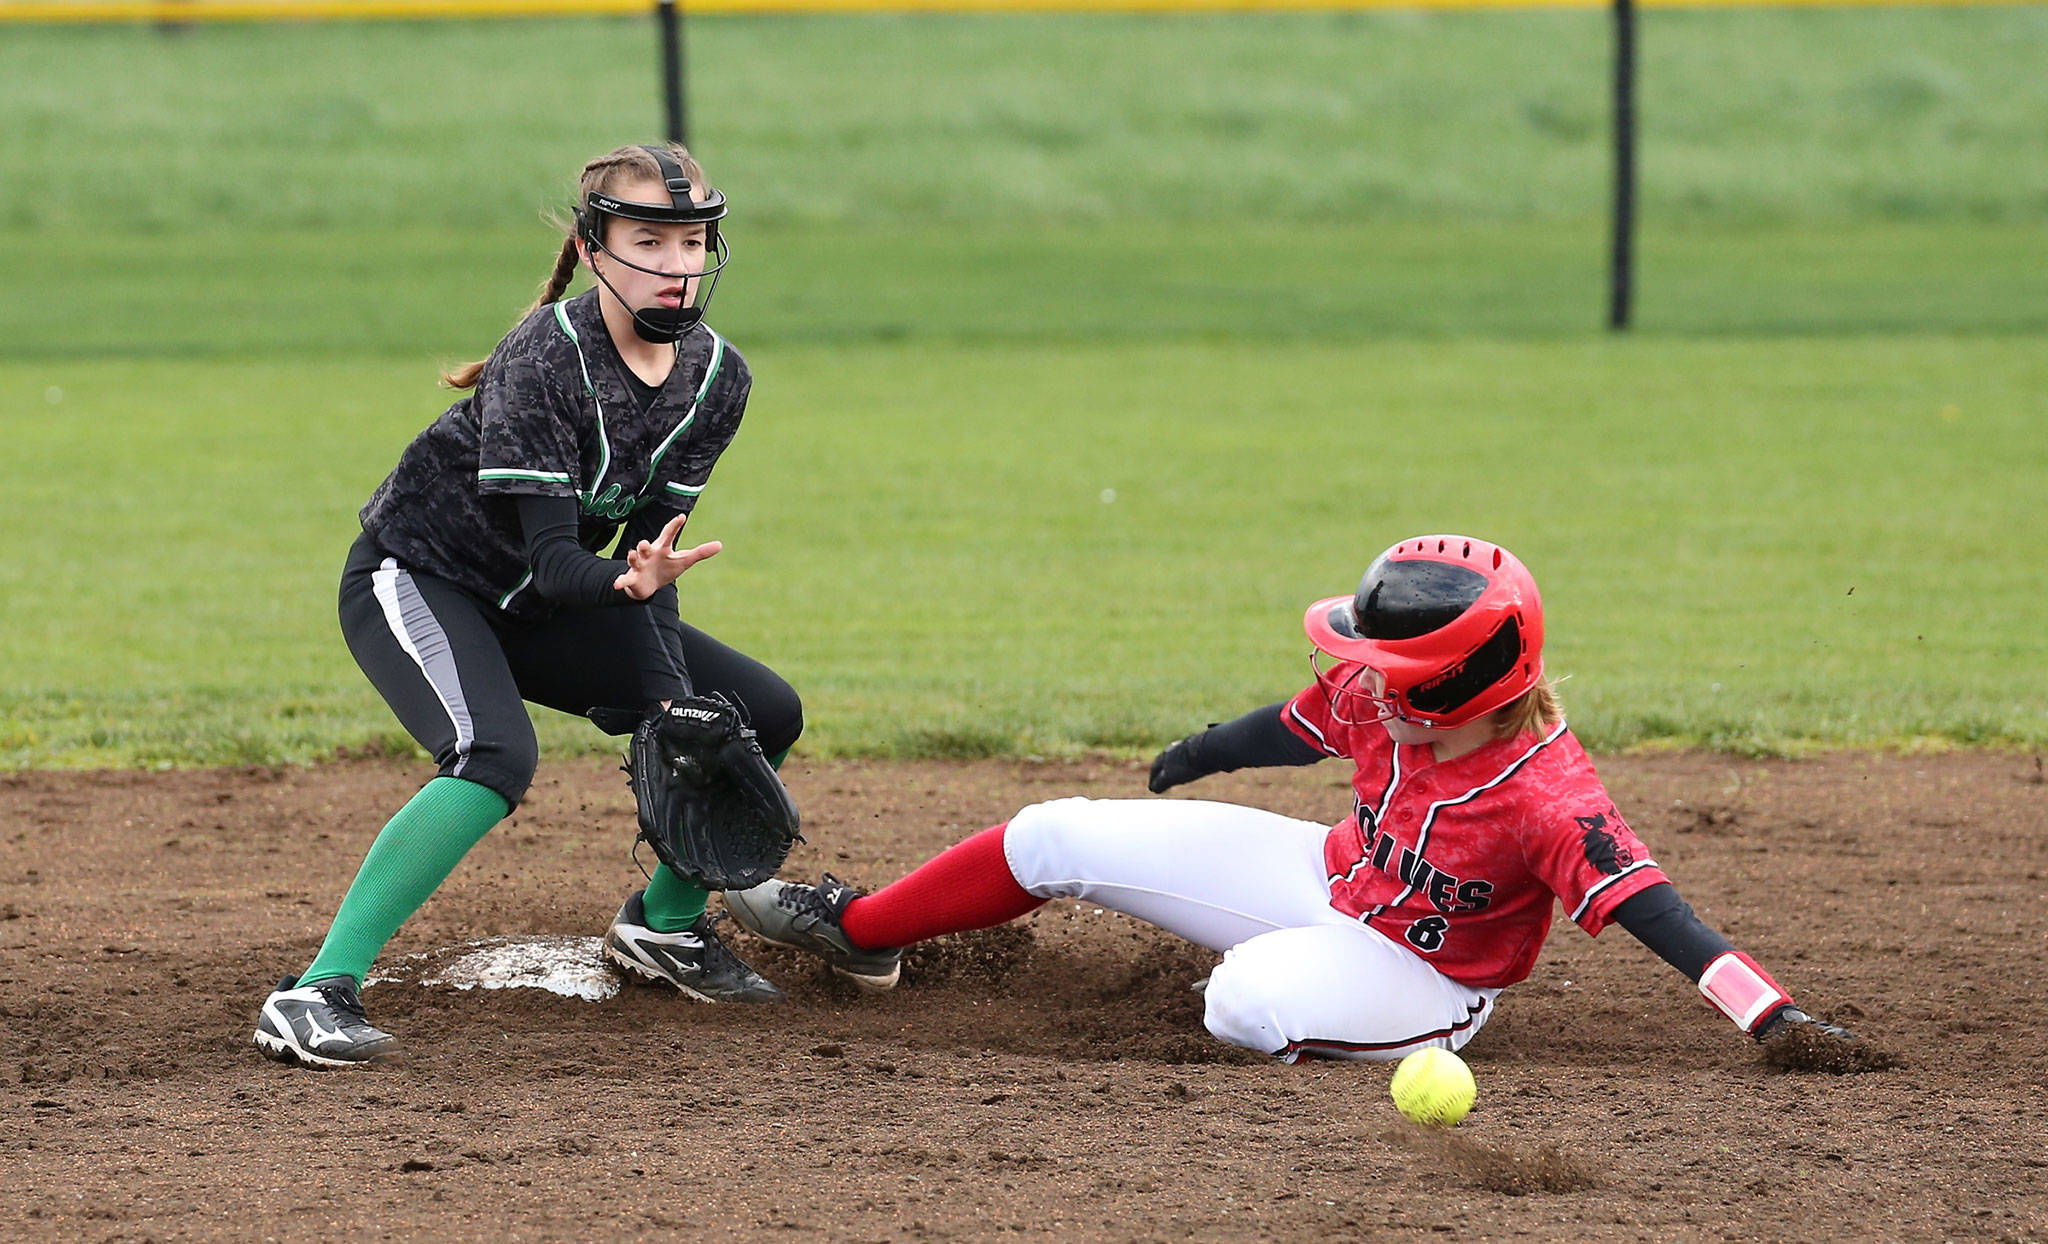 Lauren Rose beats the ball as she steals second base. Moments later she scored the inning run on Jae LeVine’s double. (Photo by John Fisken)